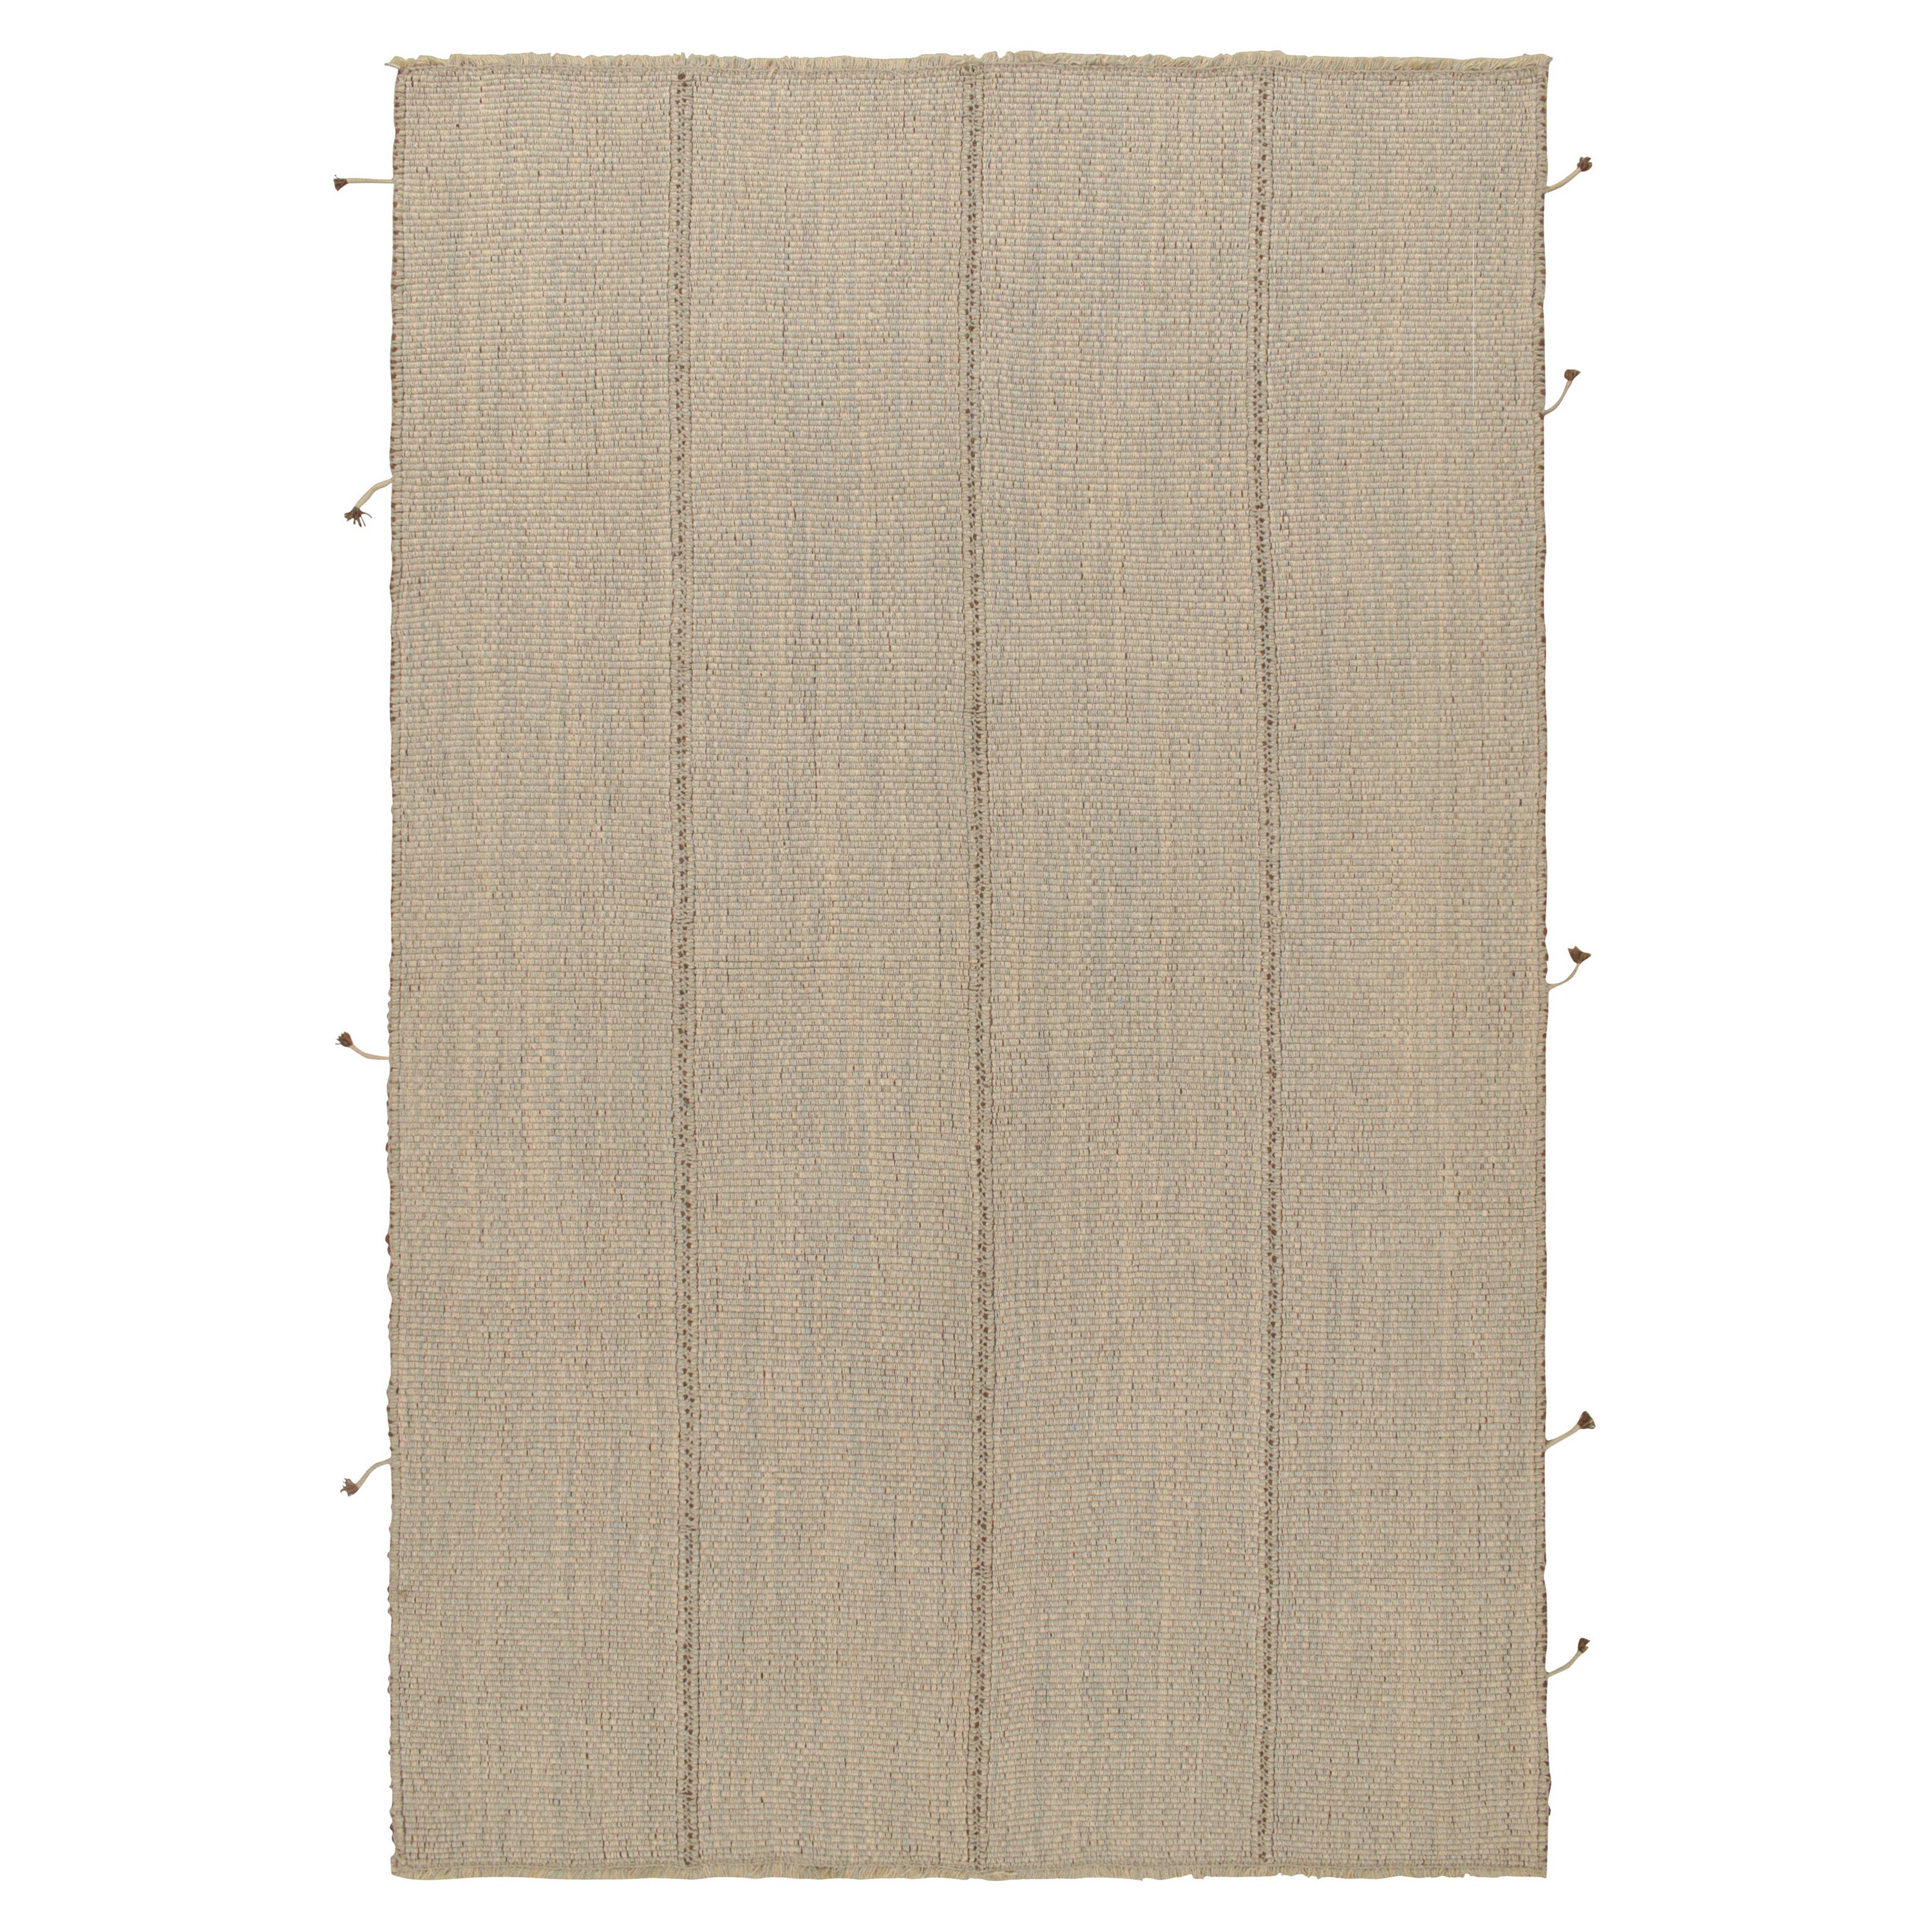 Rug & Kilim’s Contemporary Kilim in Beige with Brown and Light Blue Accents For Sale